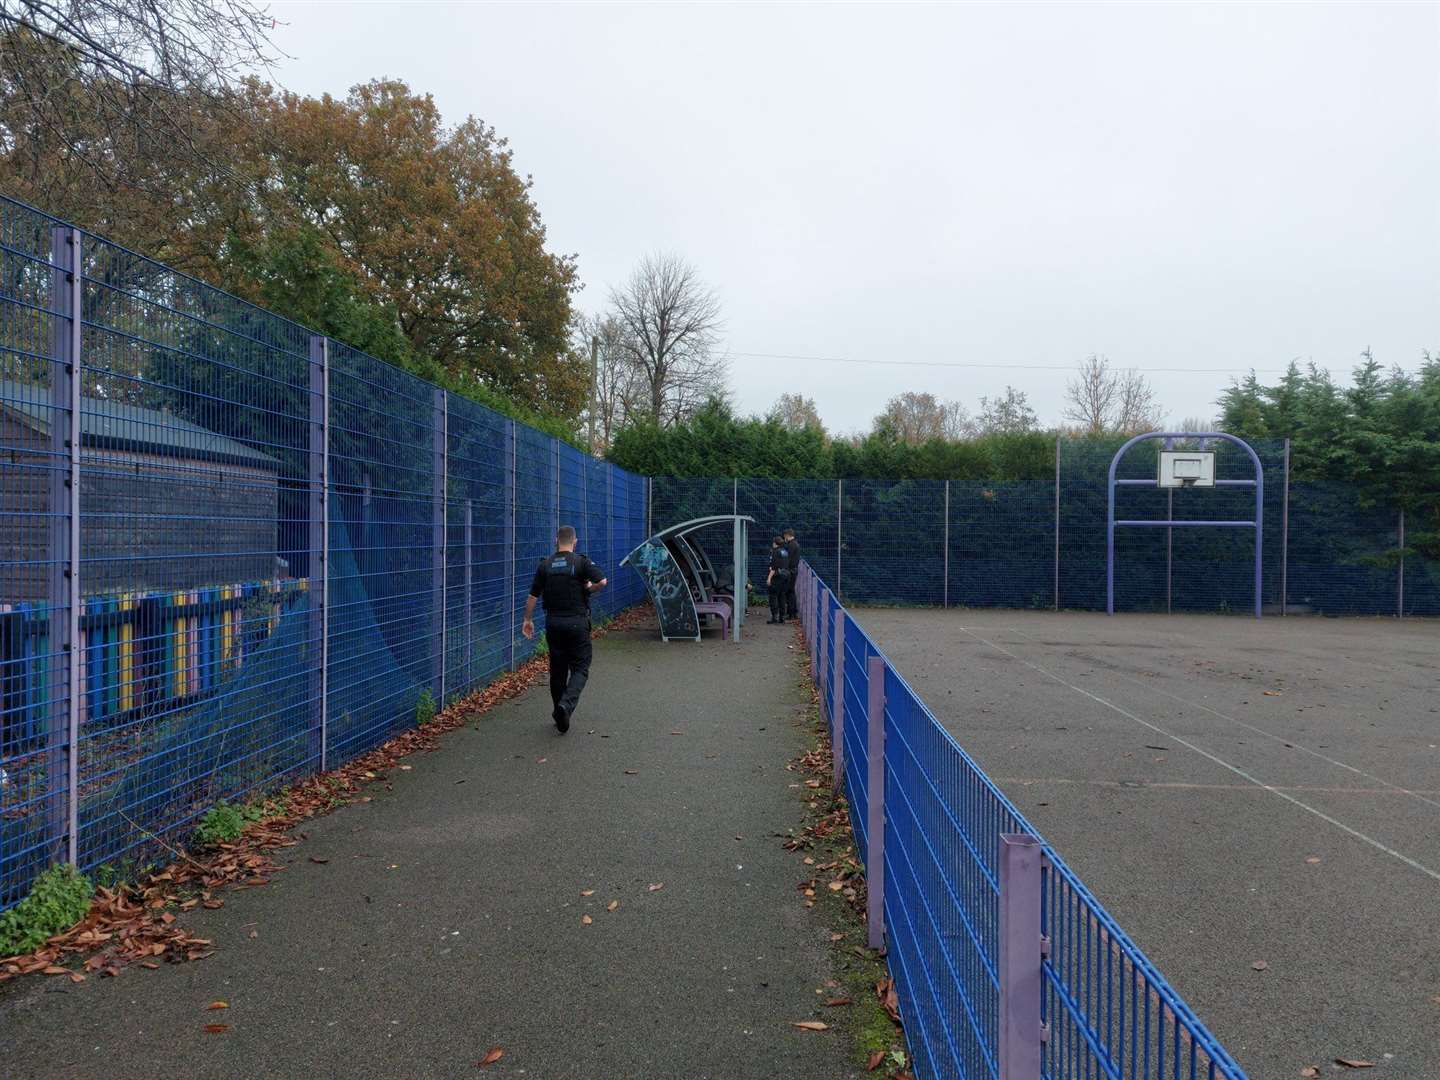 Officers searching the basketball courts in Victoria Park as part of patrols. Photo: Kent Police